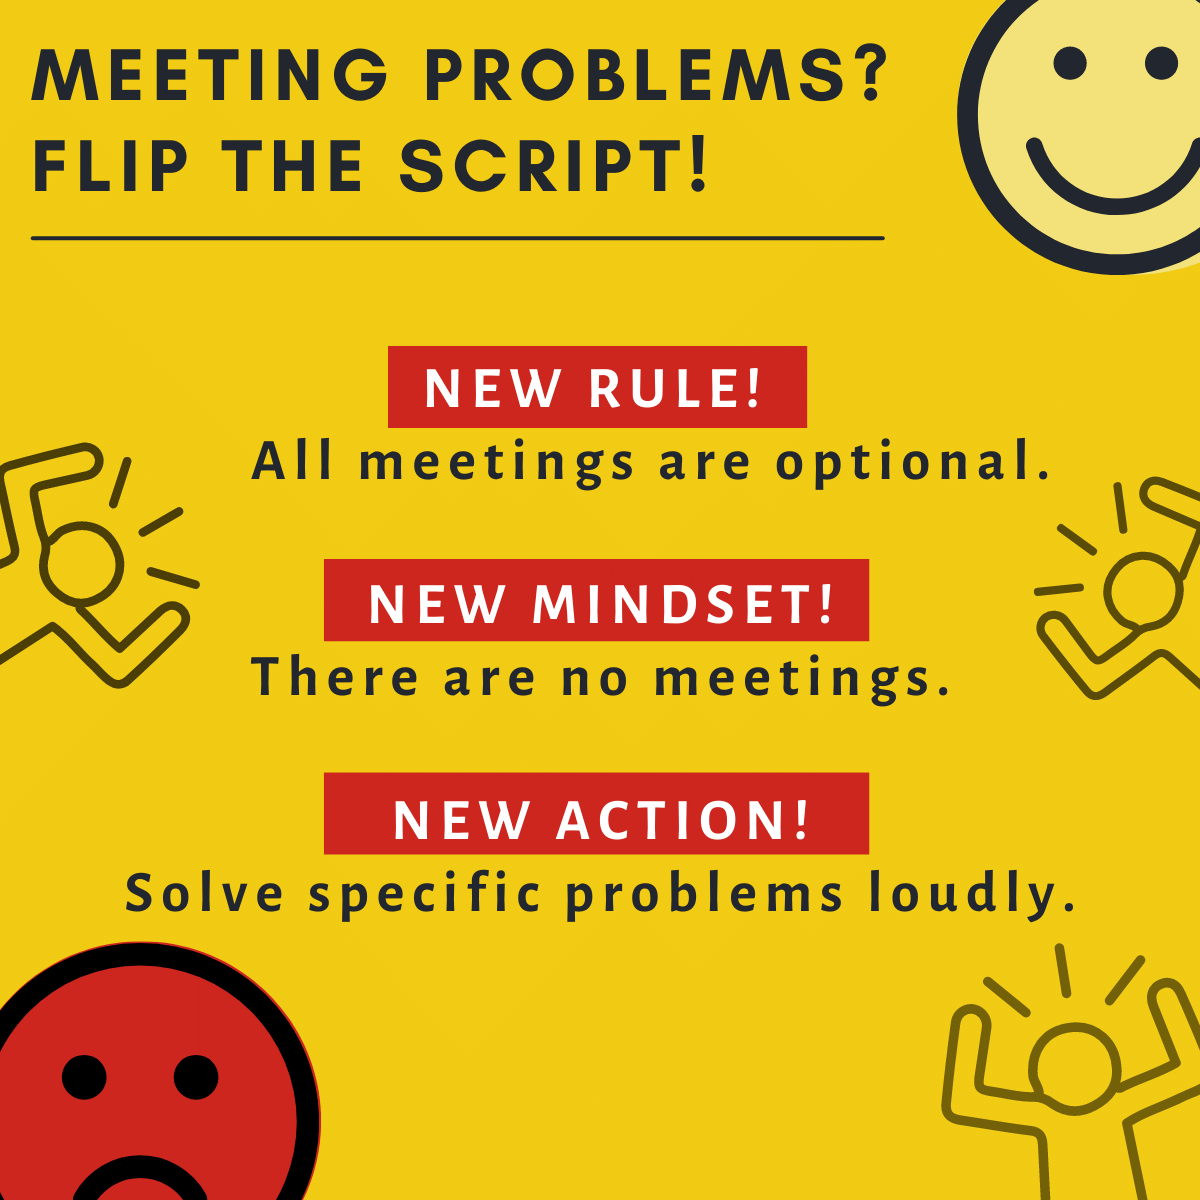 Flip the script: new rule, new mindset, new action.